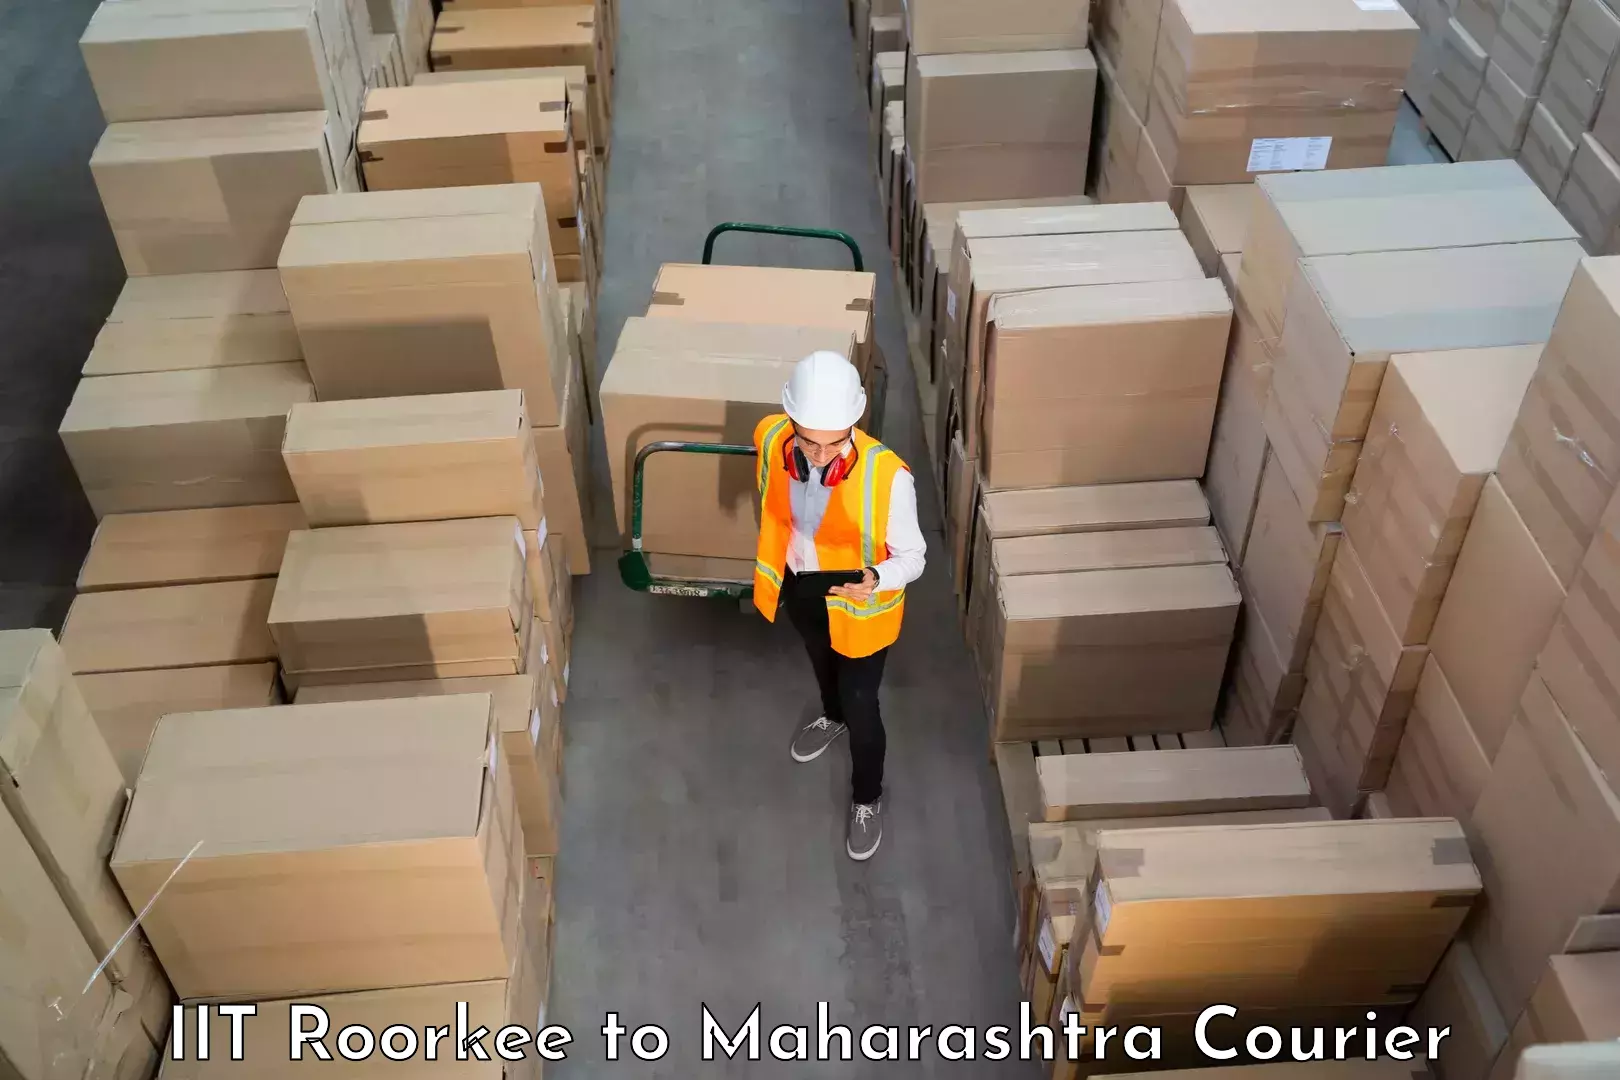 Expert packing and moving IIT Roorkee to Ahmednagar